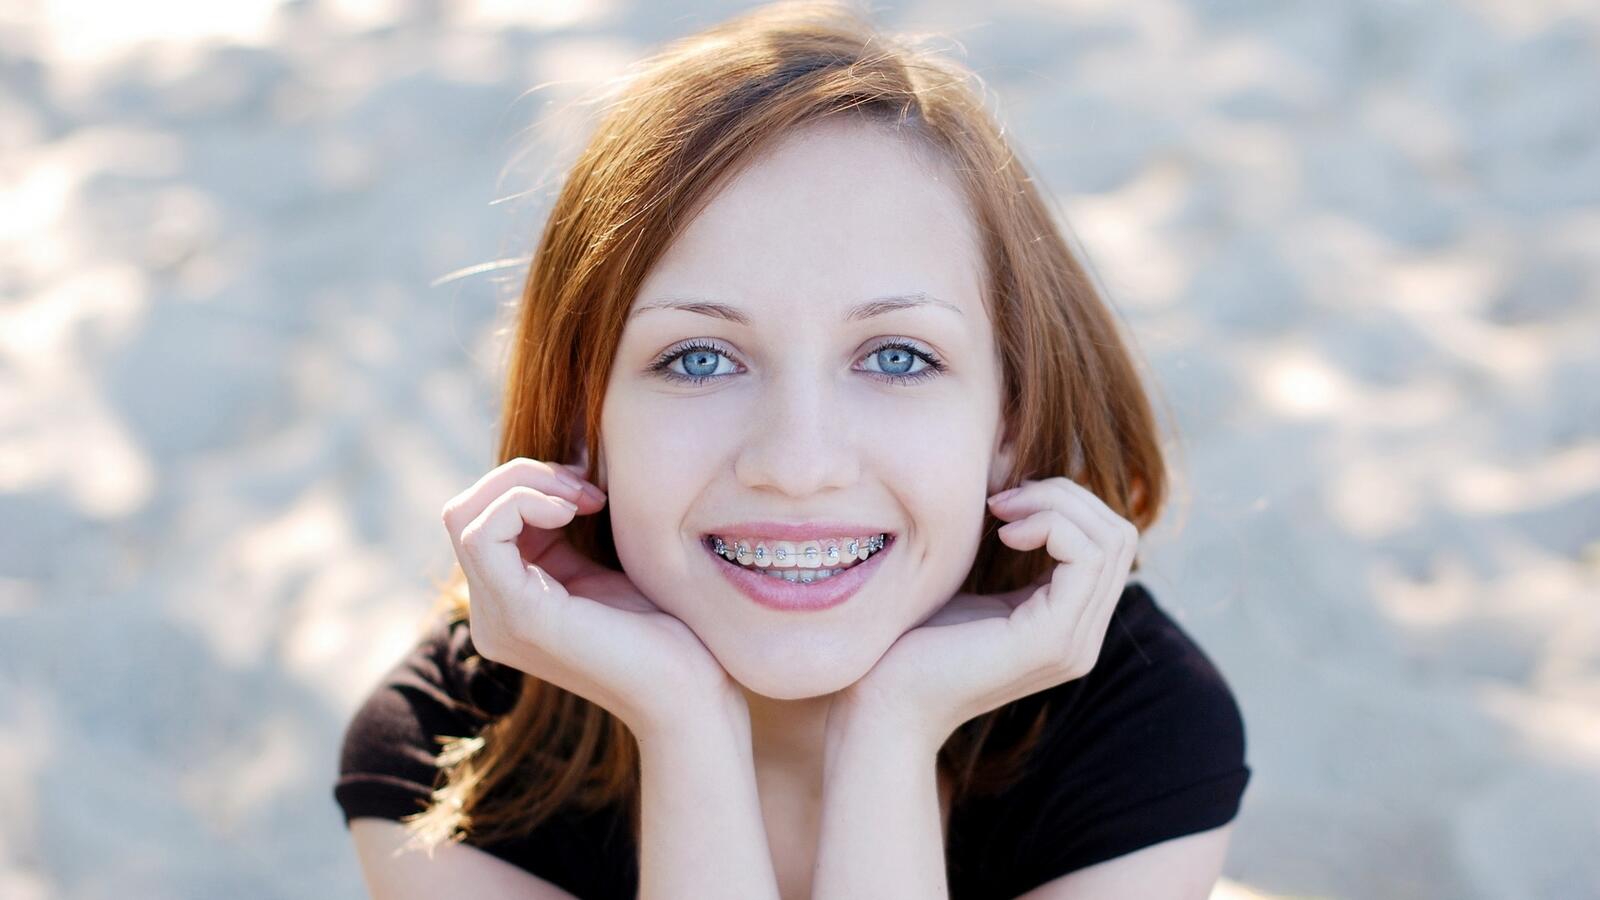 Free photo Redheaded girl smiling in braces